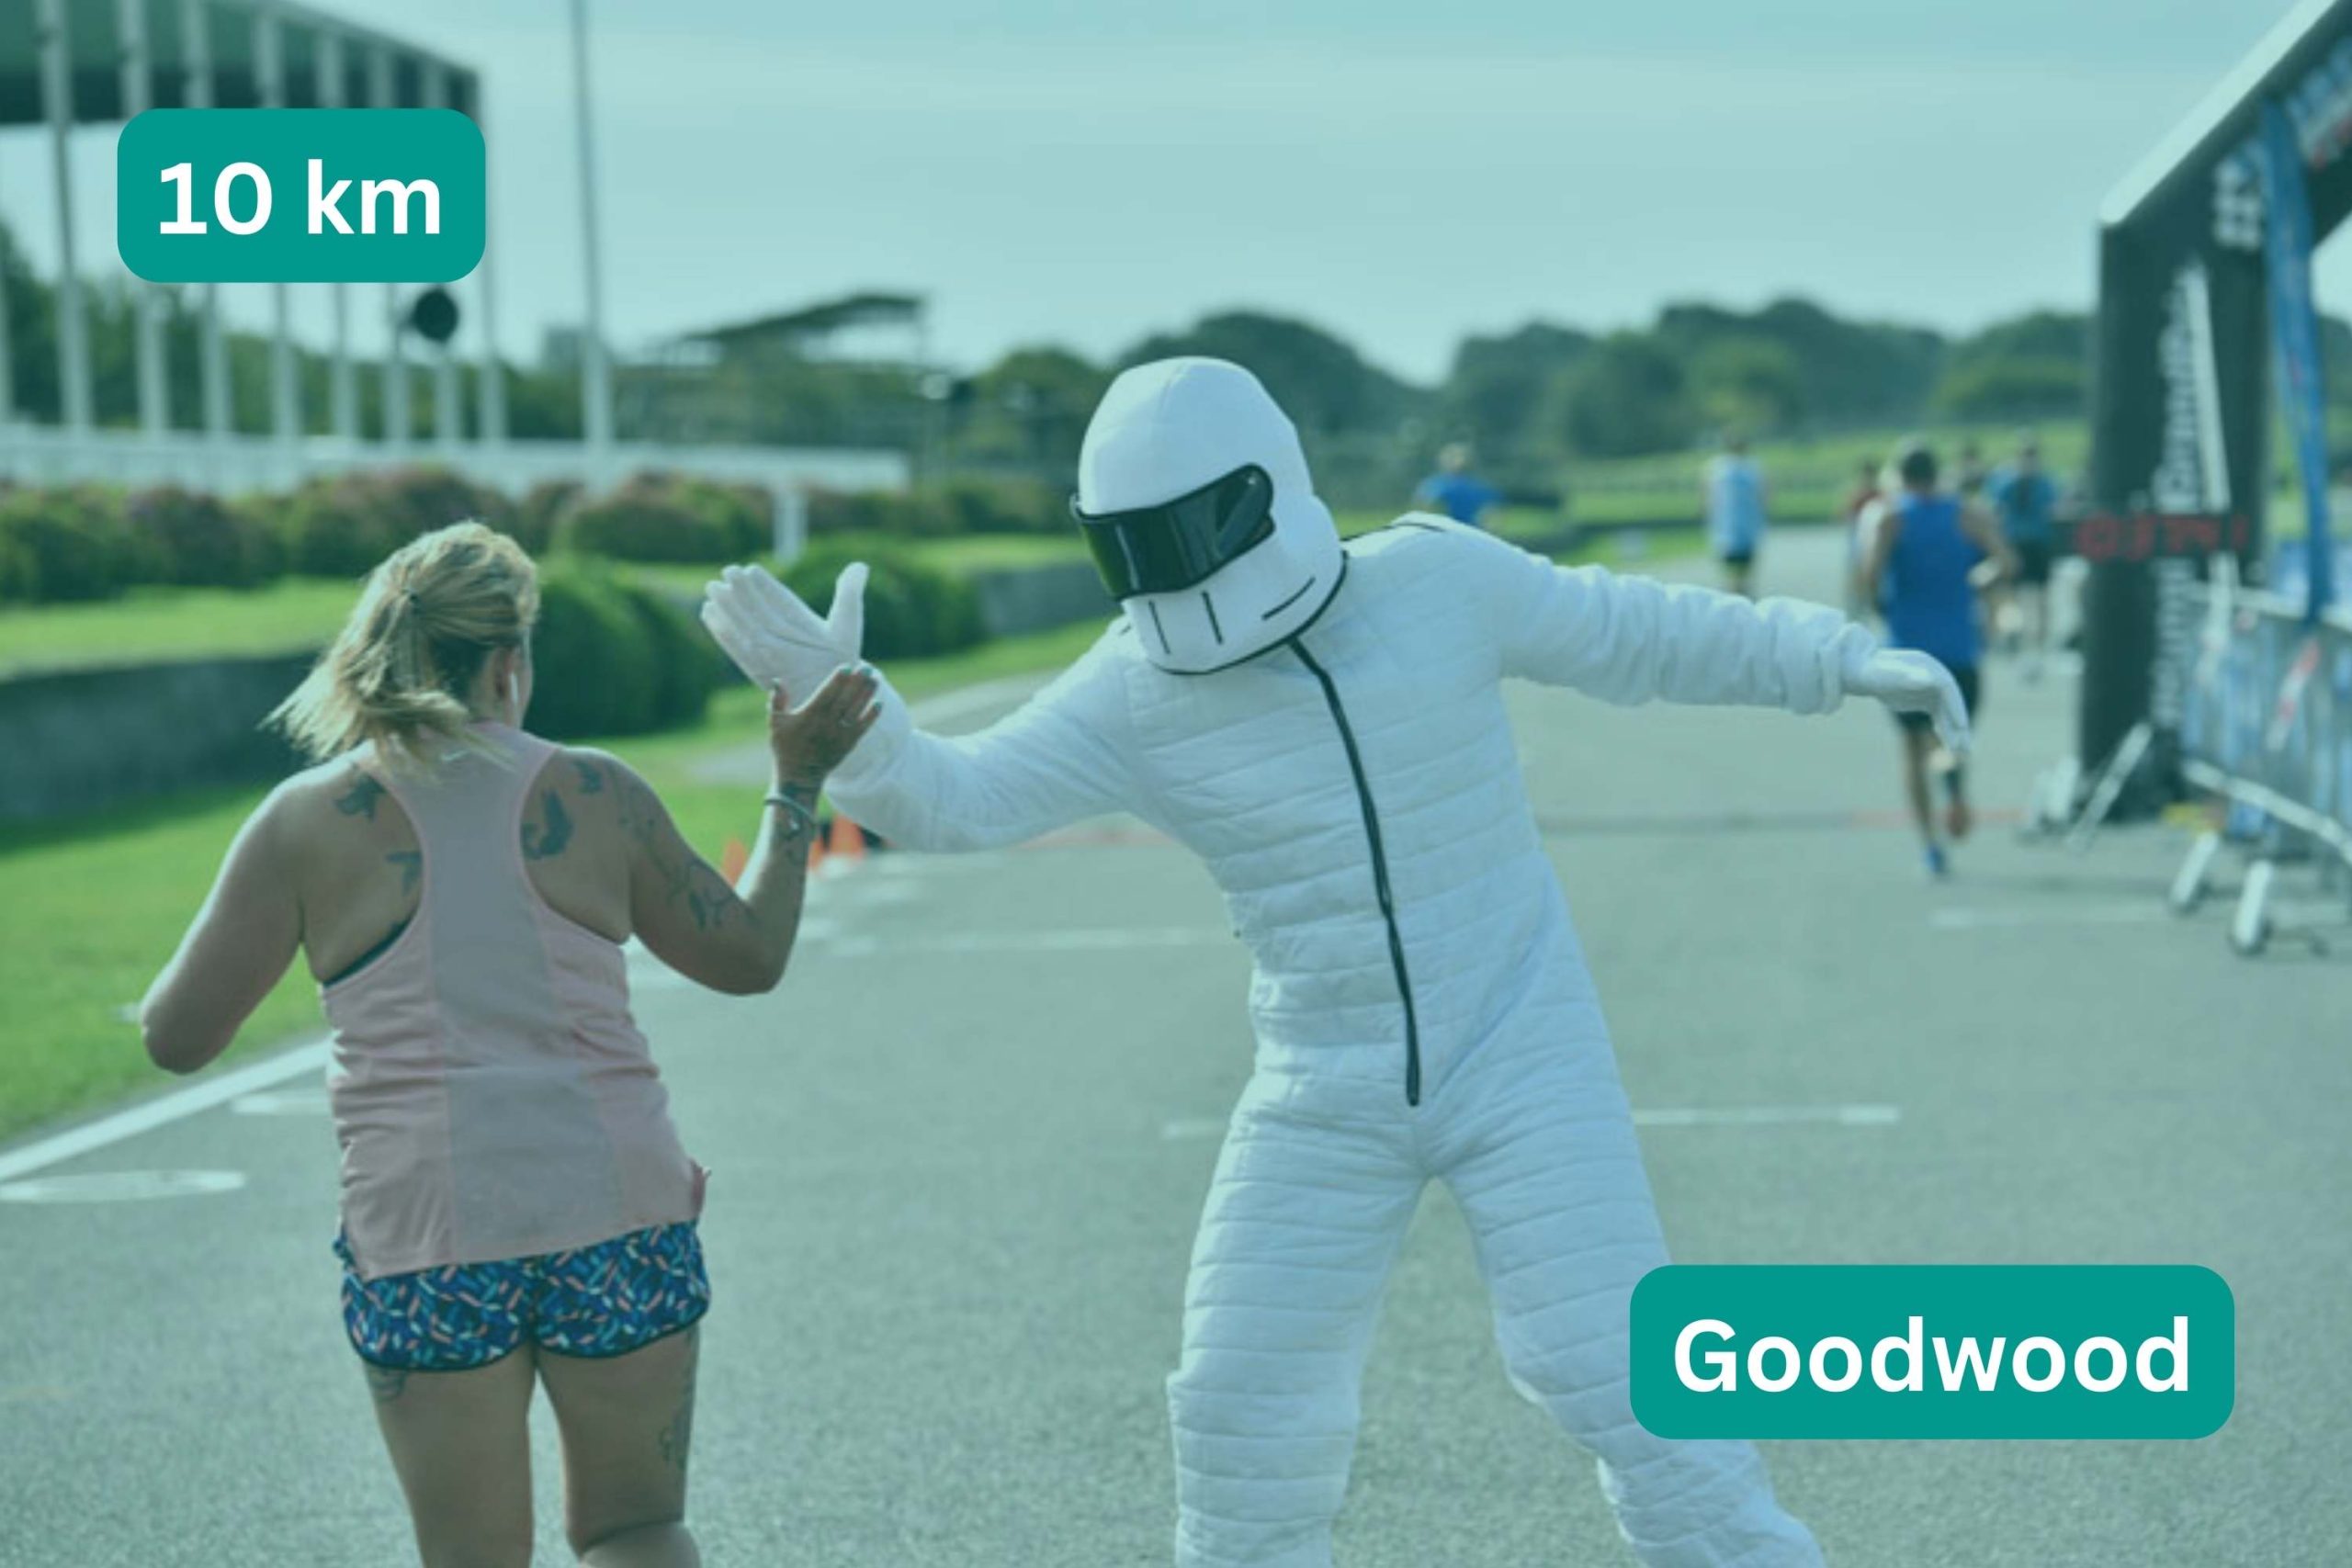 Woman giving the Stig a high five. title text 10 km Goodwood